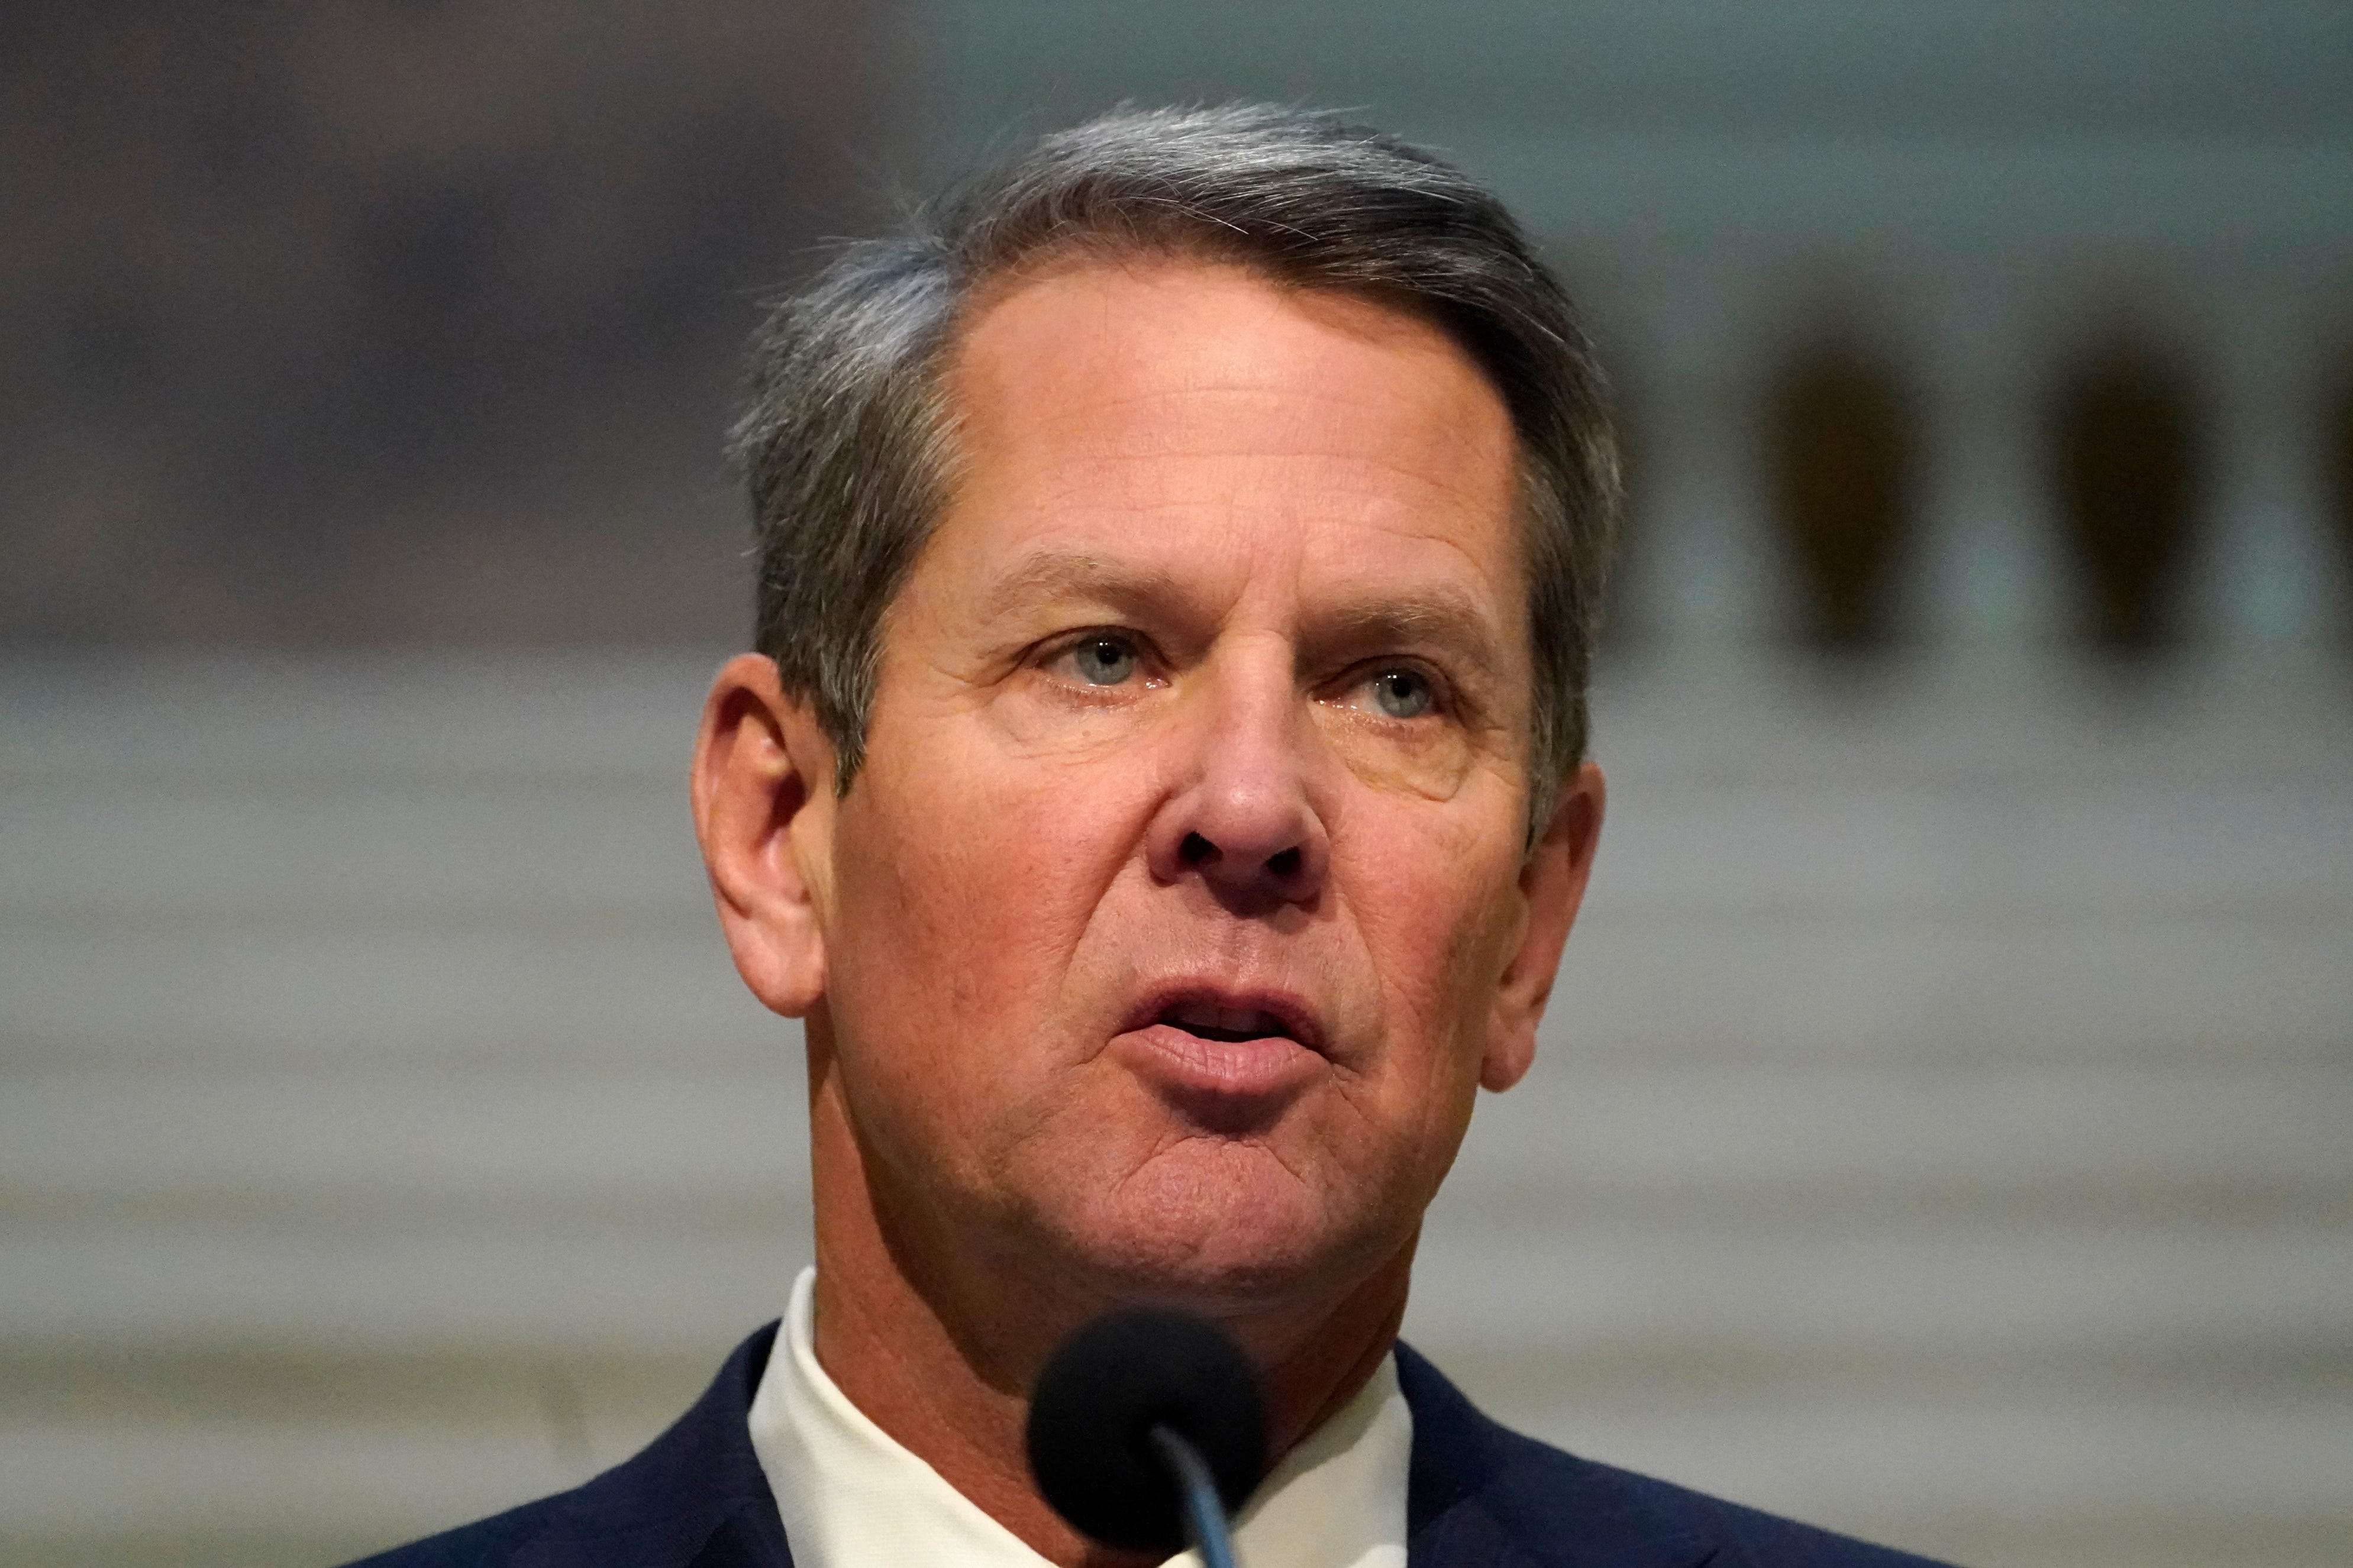 georgia-gov-brian-kemp-has-been-mercilessly-attacked-by-trump-but-he